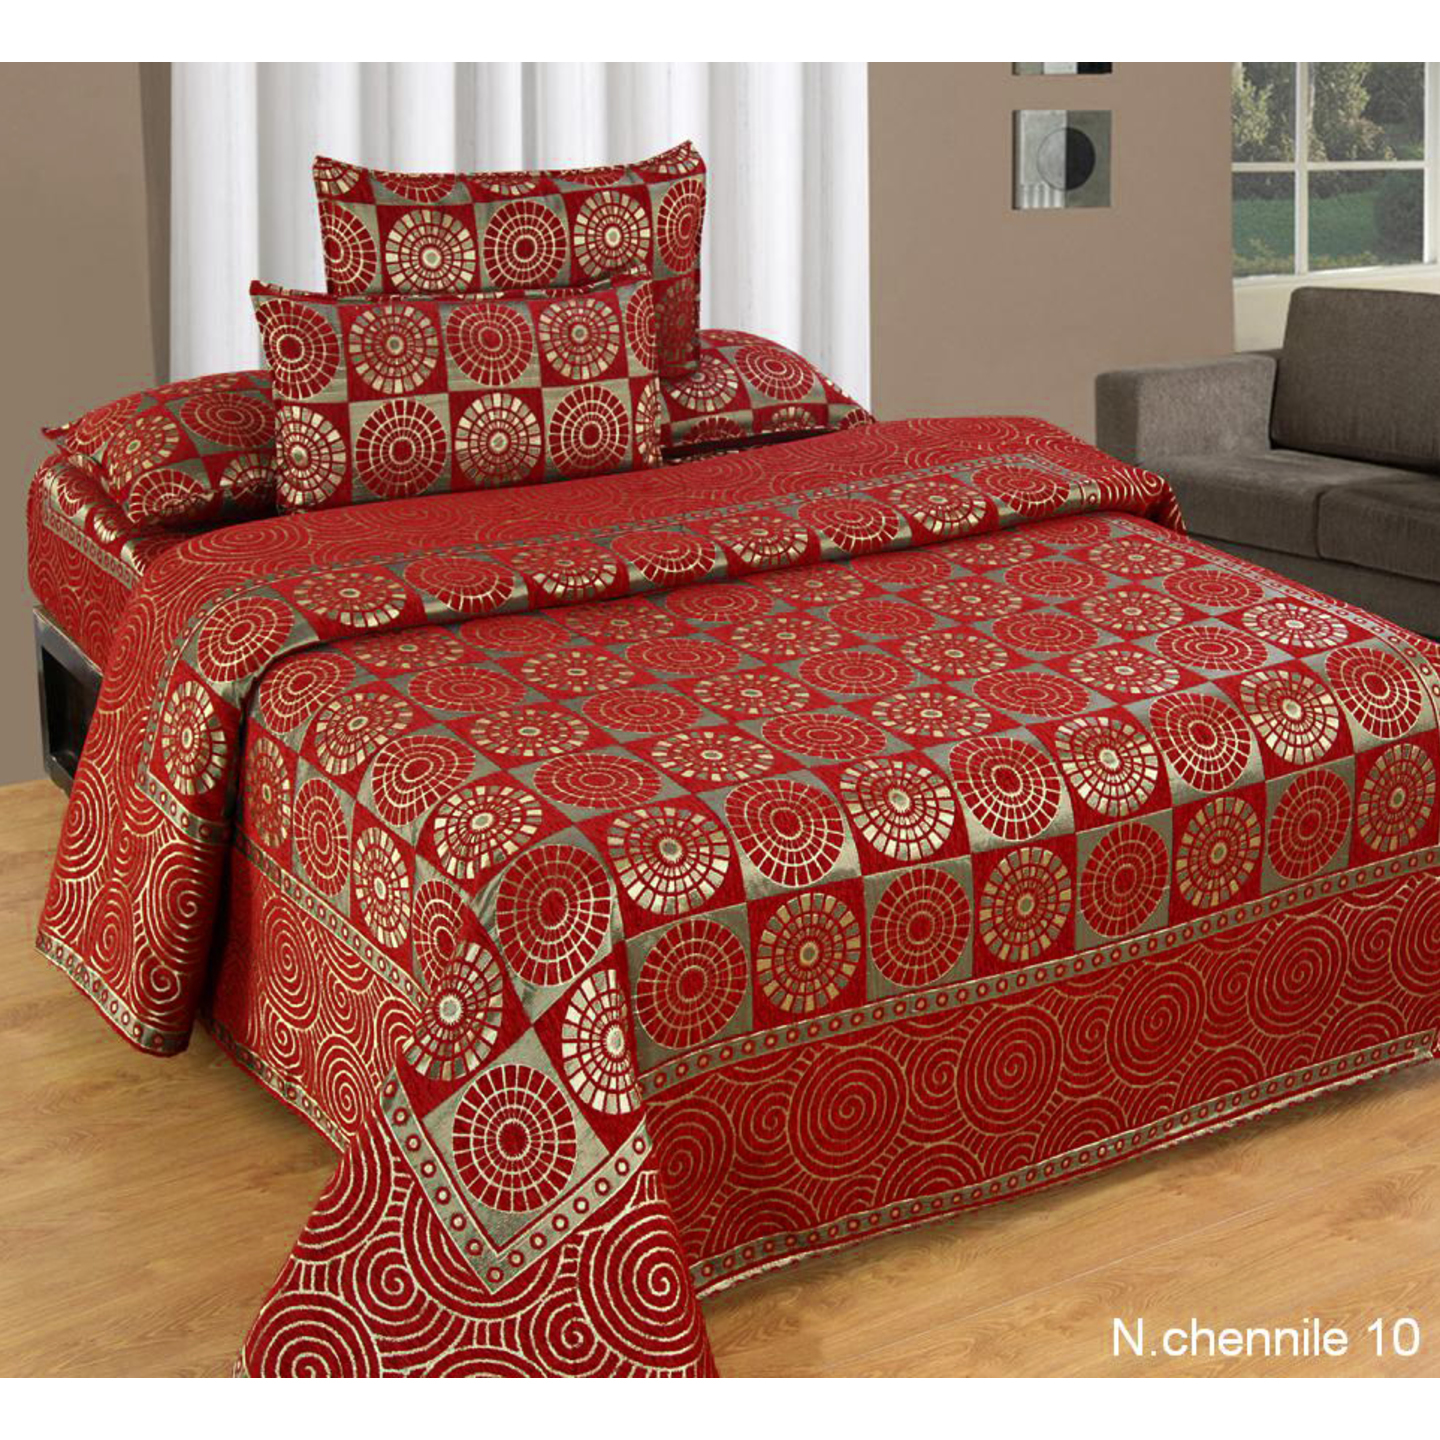 Handtex Home Maroon Chenille Queen  Size Double Bed sheet With Two Pillow Covers